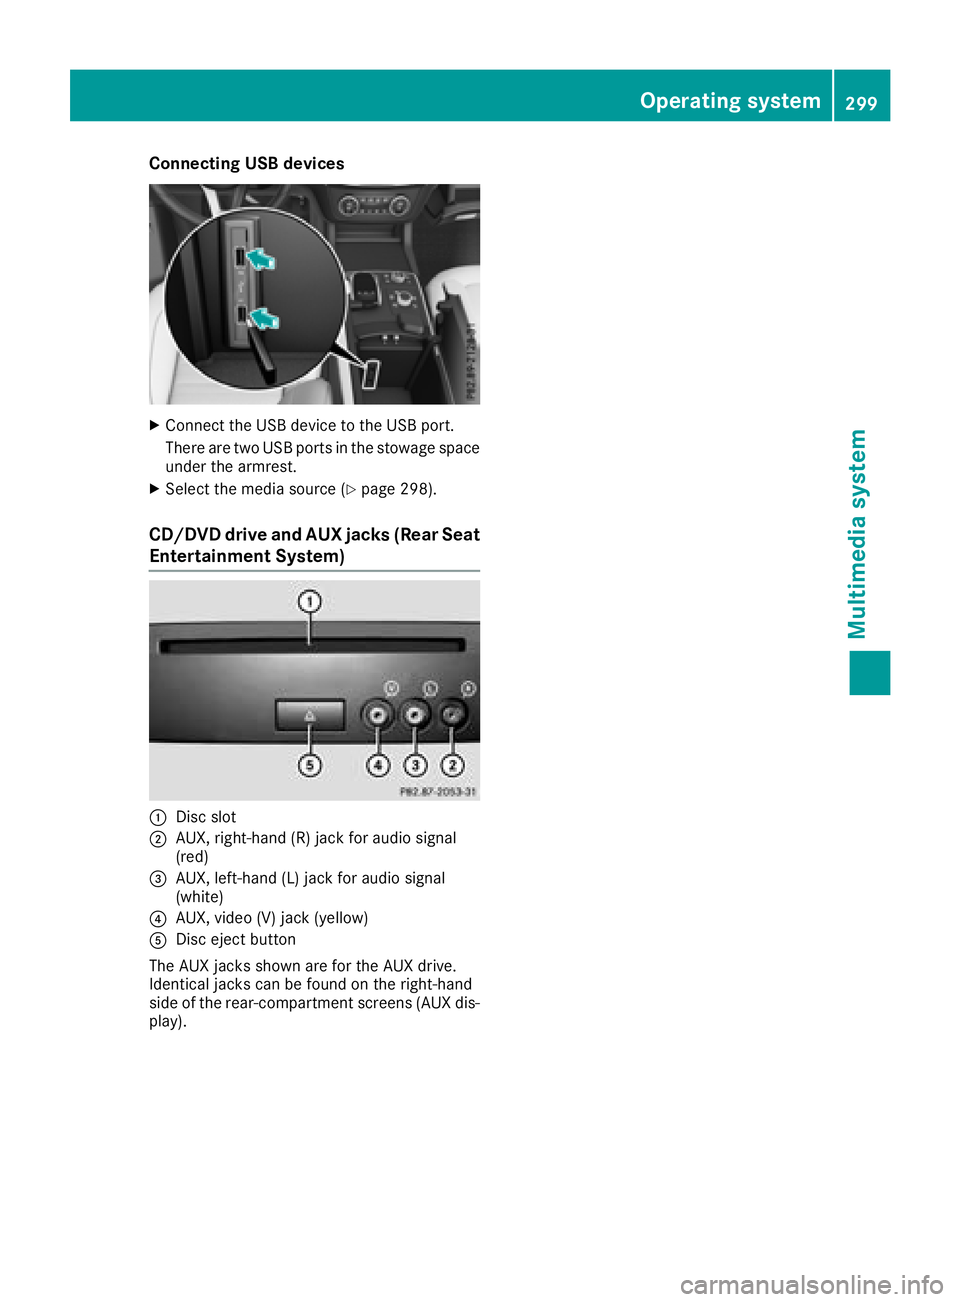 MERCEDES-BENZ GLS 2018  Owners Manual Connecting USB devices X
Connect the USB device to the USB port.
There are two USB ports in the stowage space
under the armrest. X
Select the media source ( Y
page 298).
CD/DVD drive and AUX jacks (Re